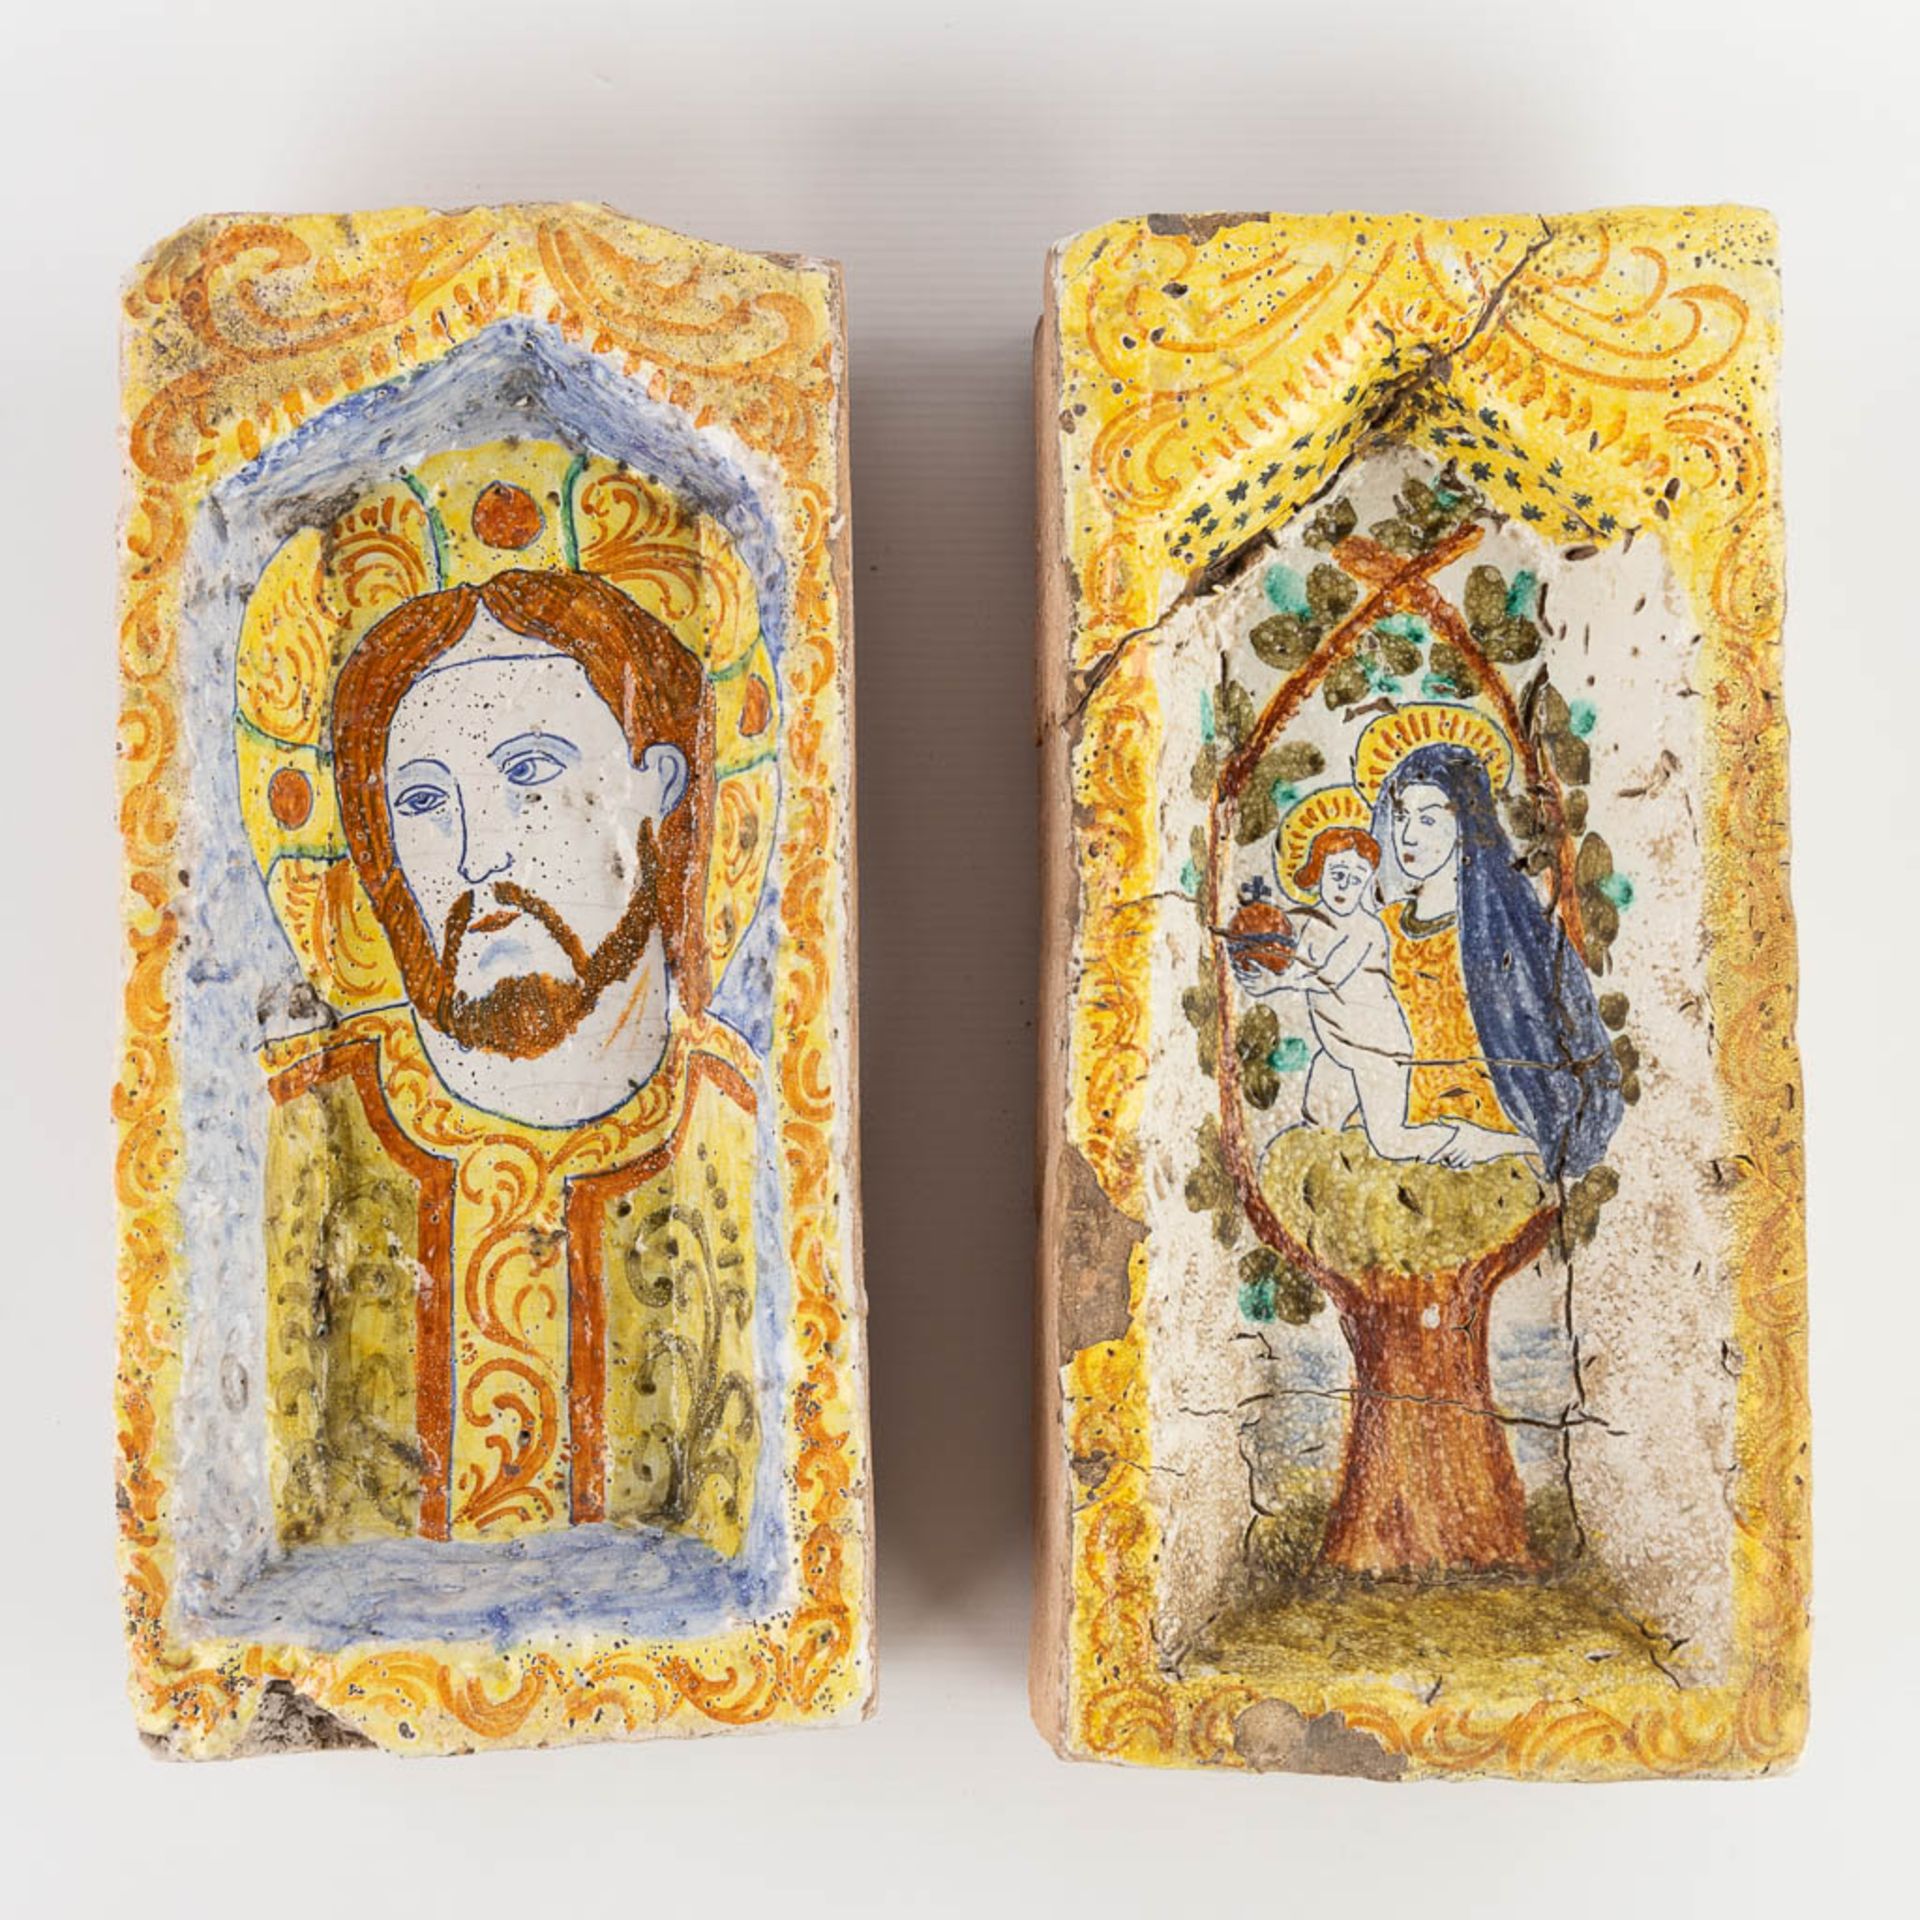 Two terracotta nices/recesses, terracotta with a polychrome image of Jesus and Madonna with a Child.